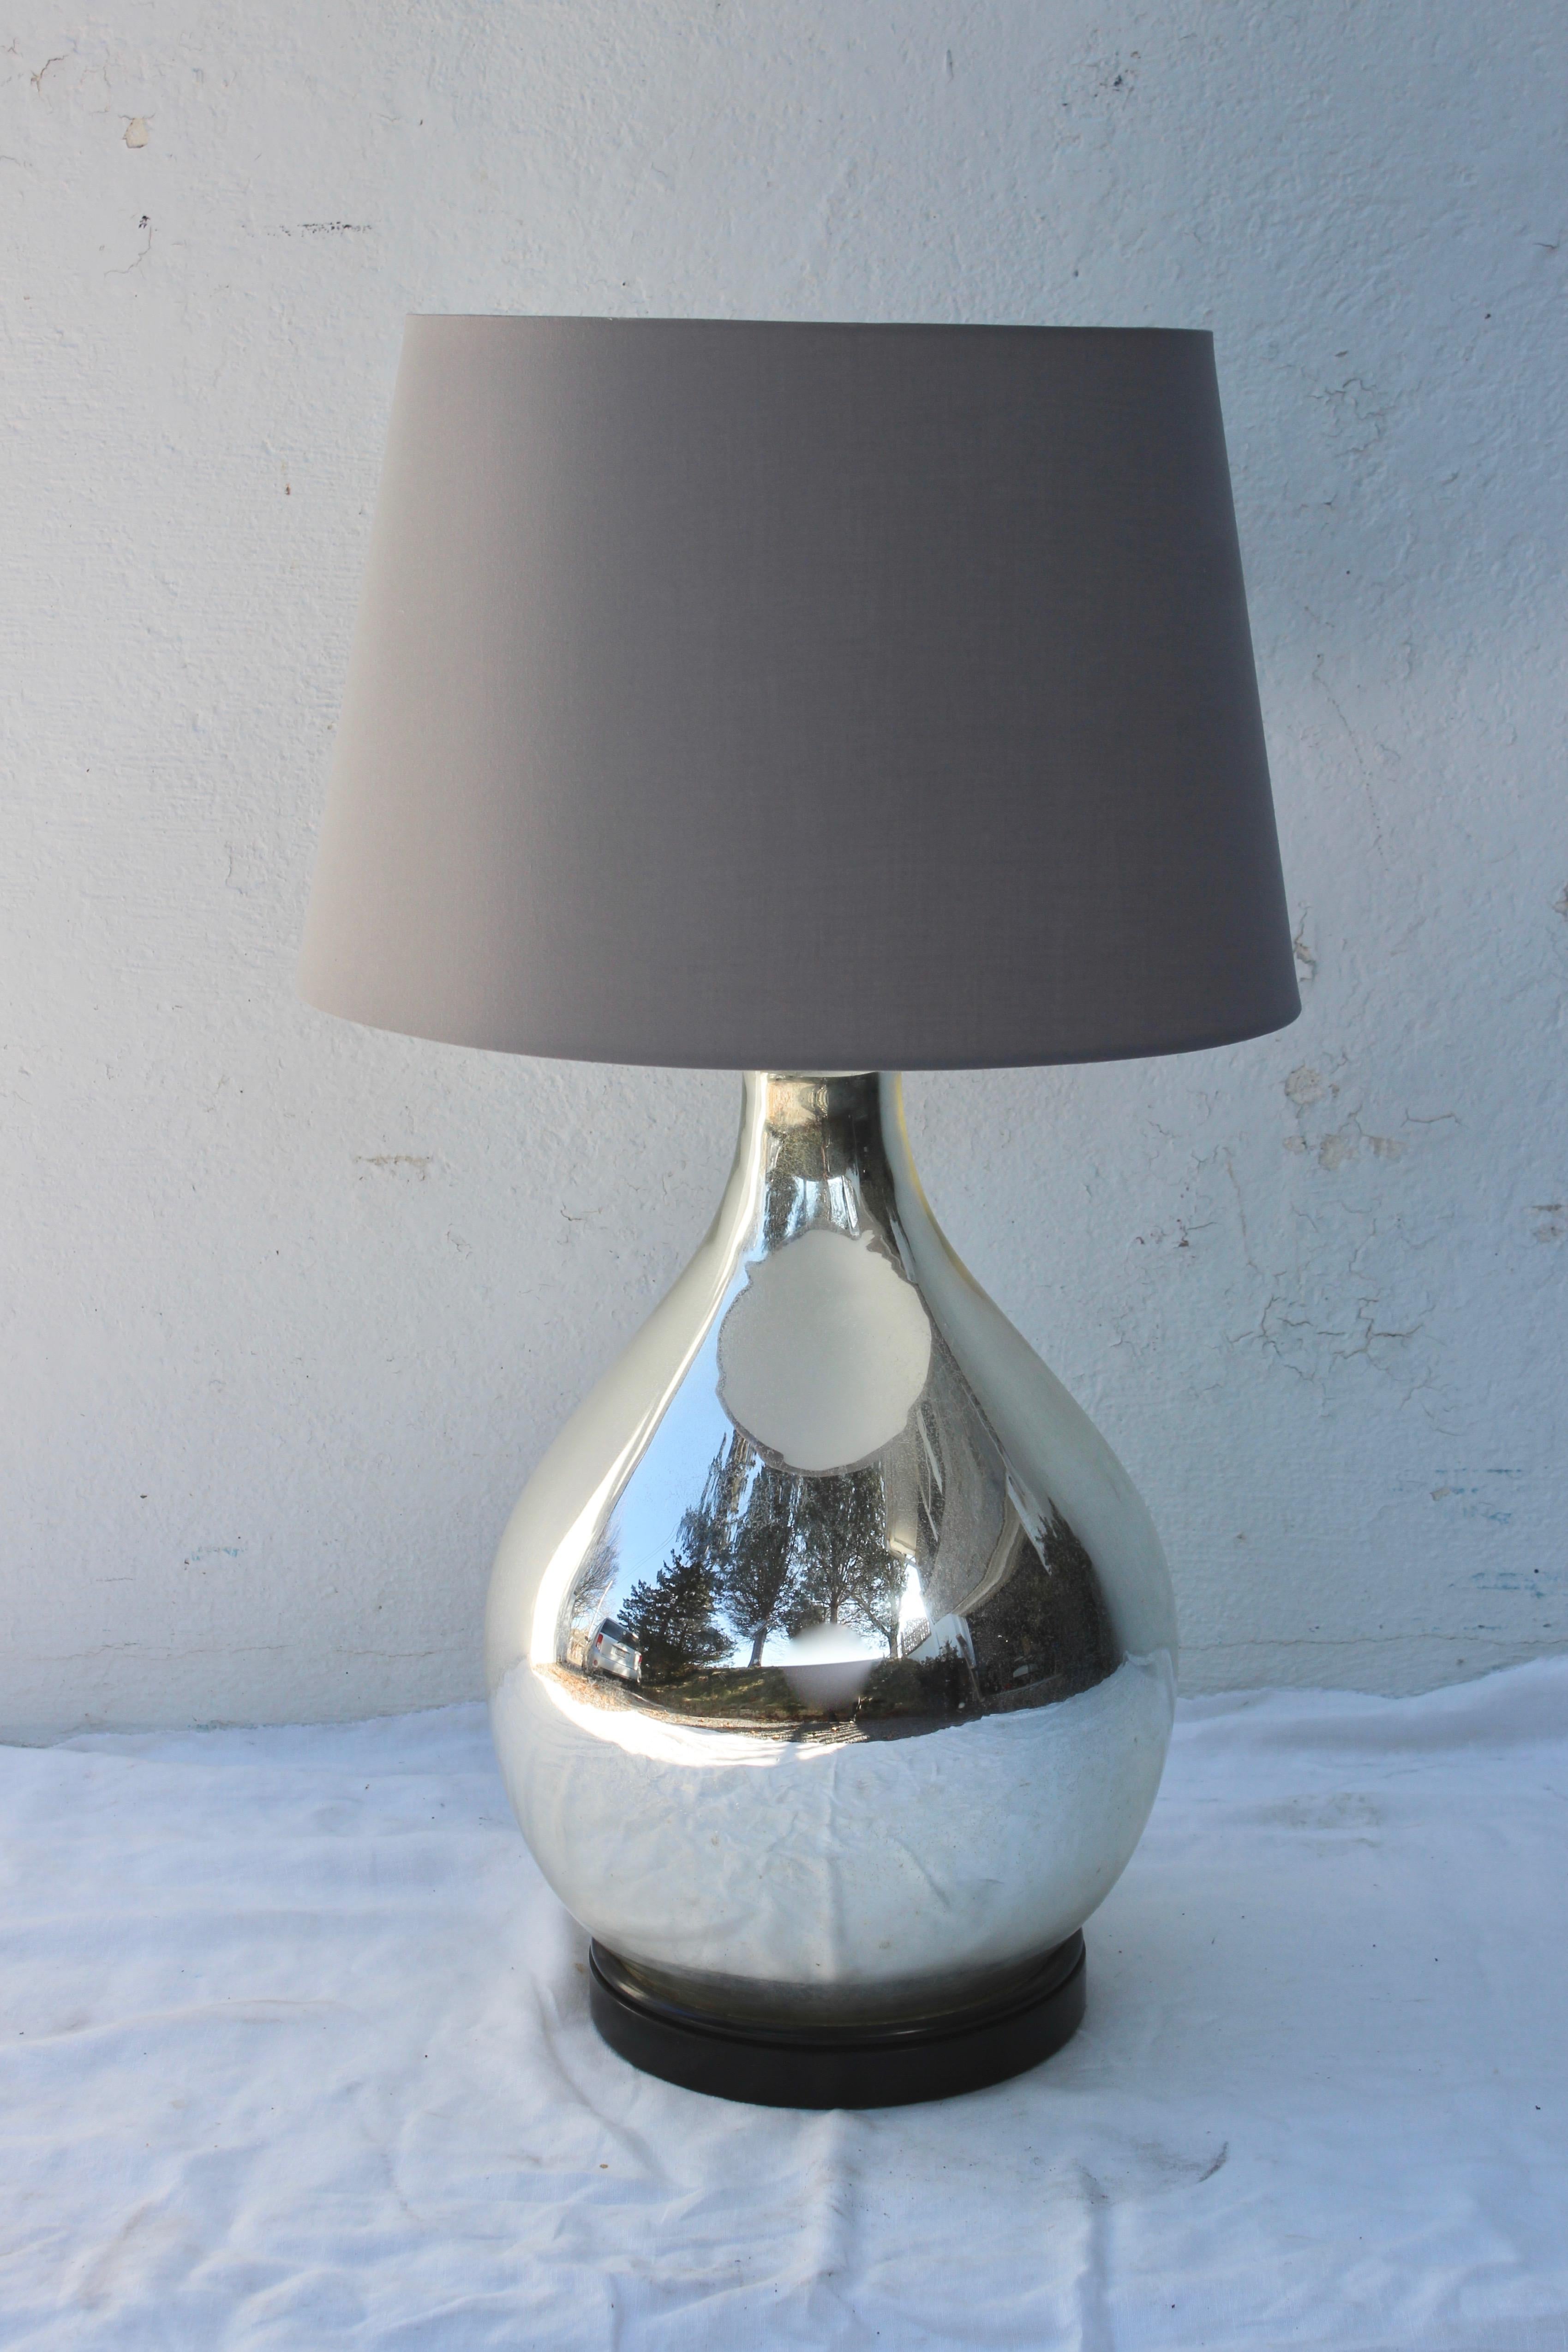 Large Mercury glass table lamp with painted black wood base and cloth covered twisted cord. Lampshade not included.